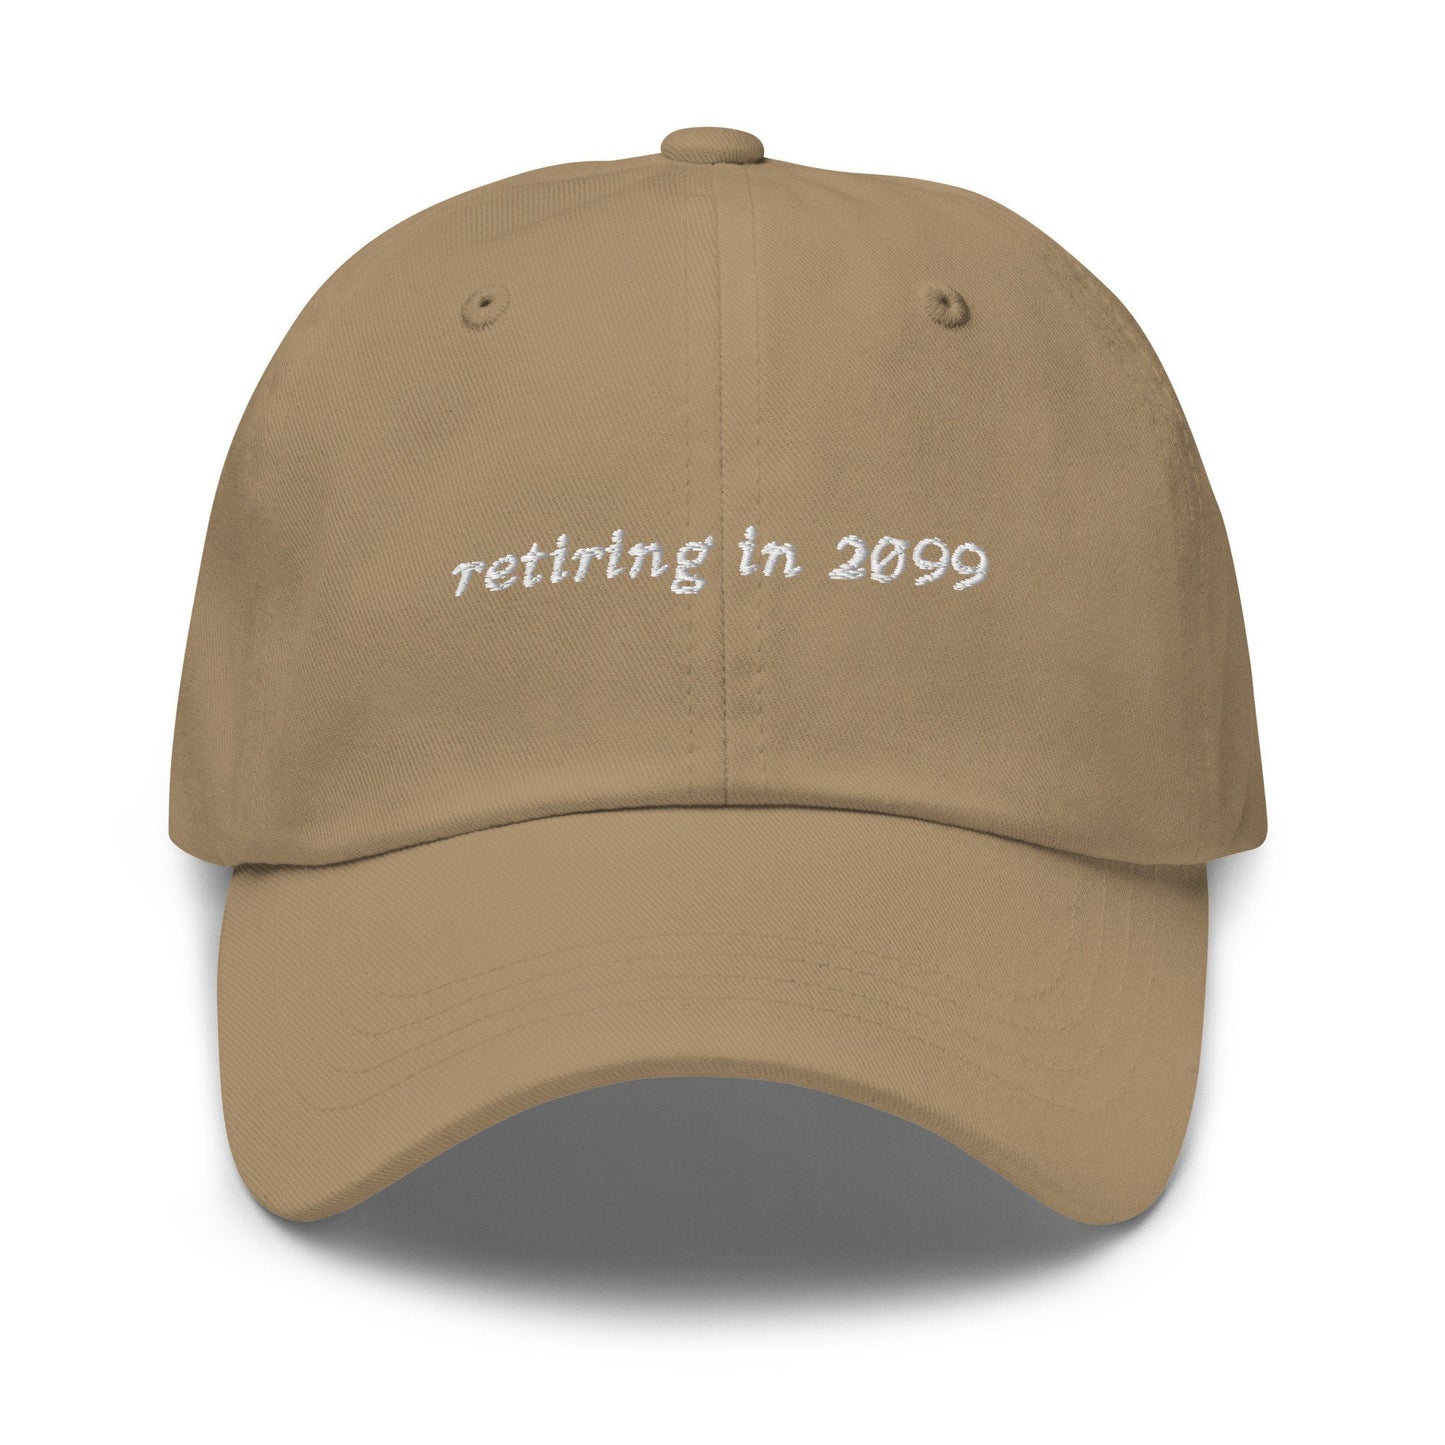 Retirement Hat - Funny Hat for the Economically Challenged Generation - Recession - Inflation - Cotton Embroidered Baseball Cap - Evilwater Originals